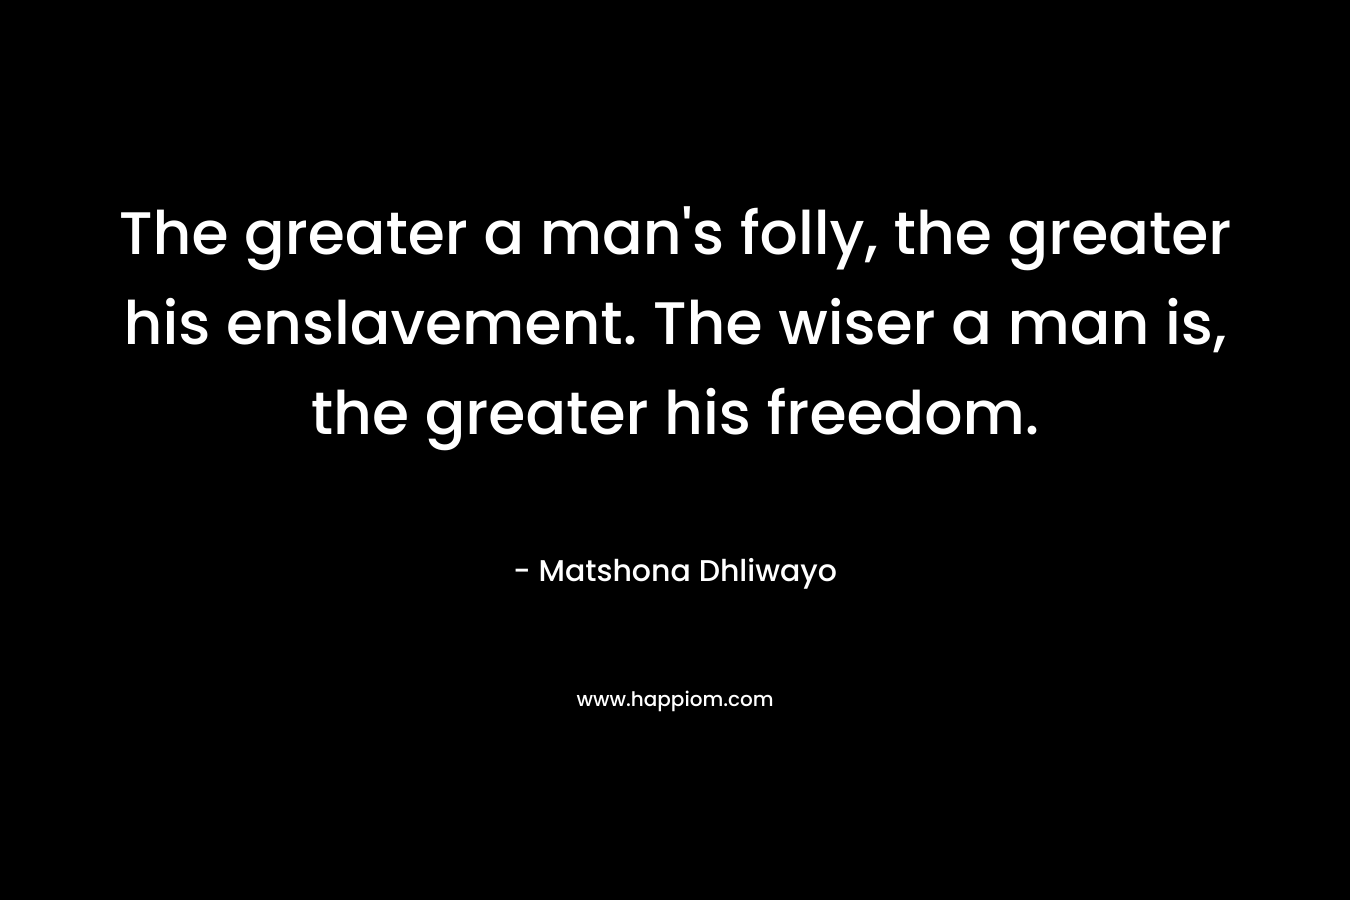 The greater a man's folly, the greater his enslavement. The wiser a man is, the greater his freedom.